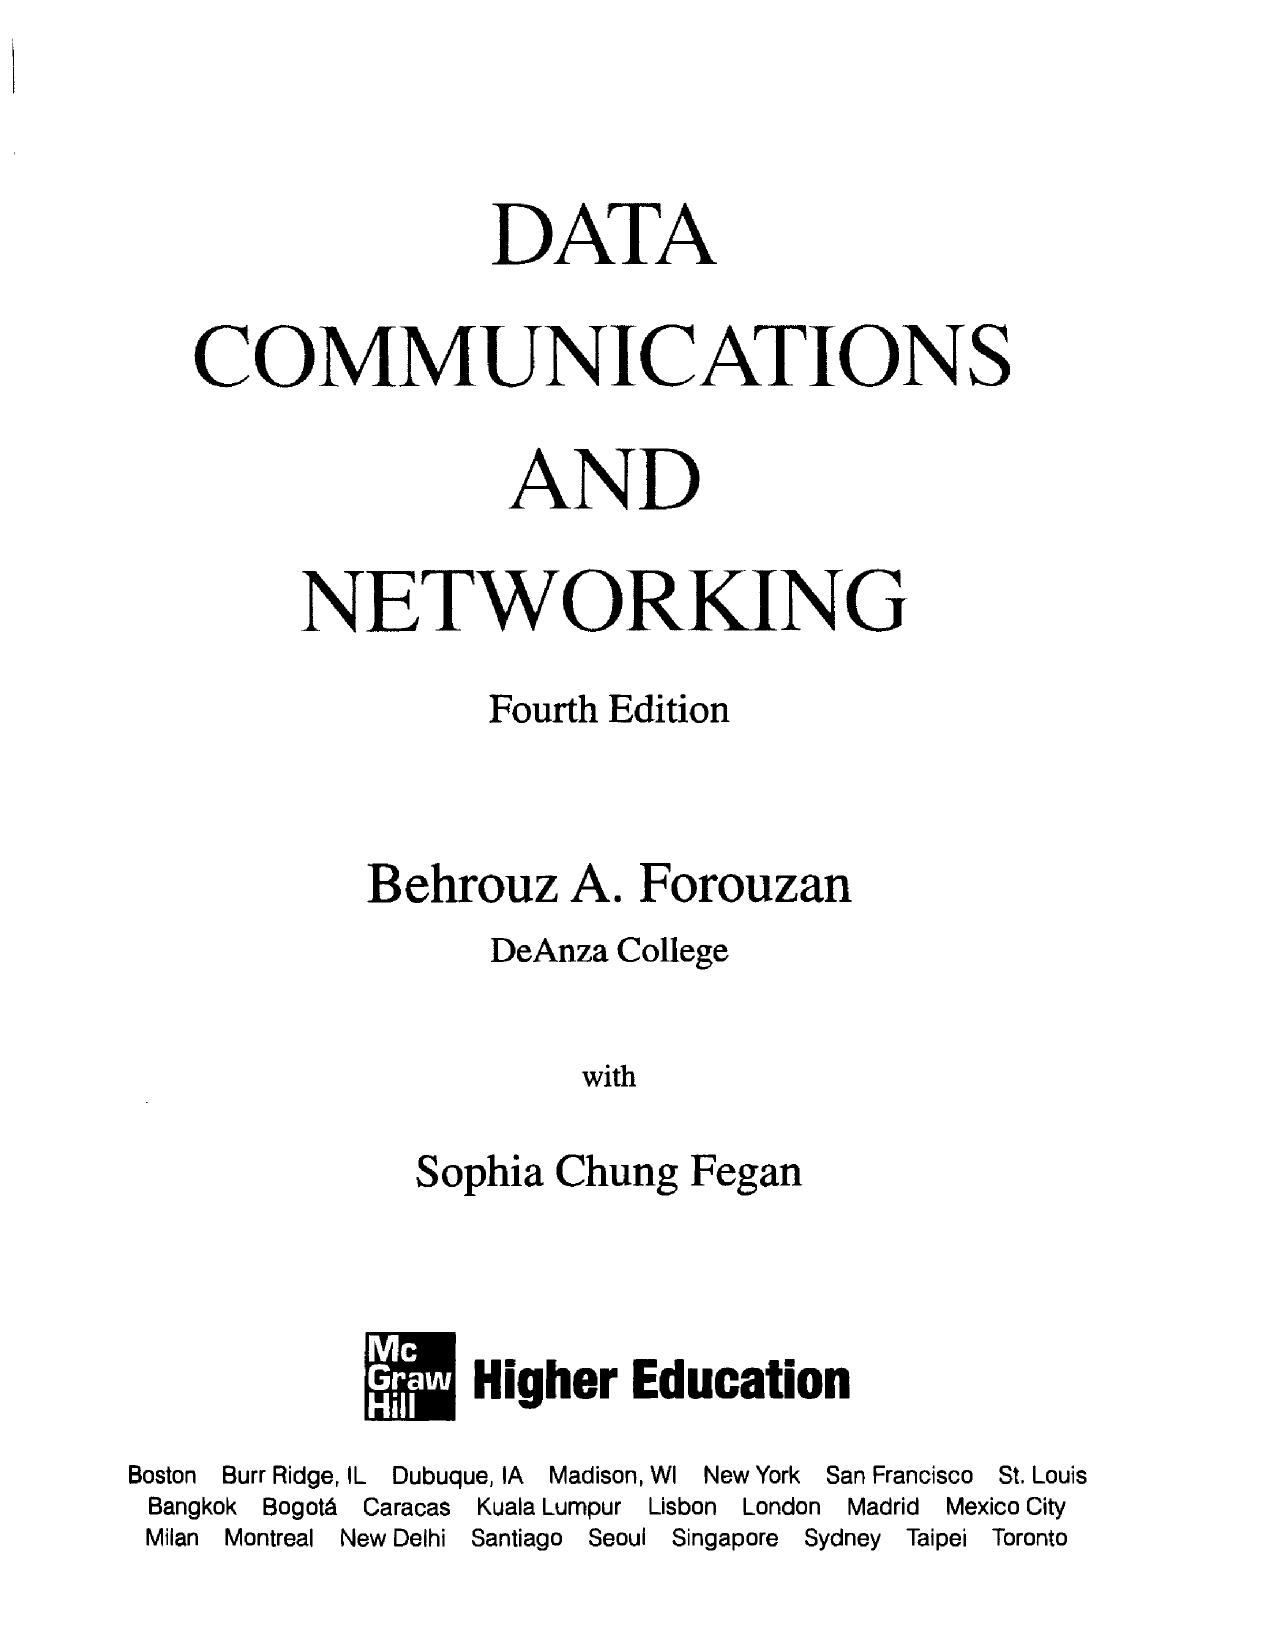 Data Communication and Networking by Behrouz A. Forouzan 4th edition